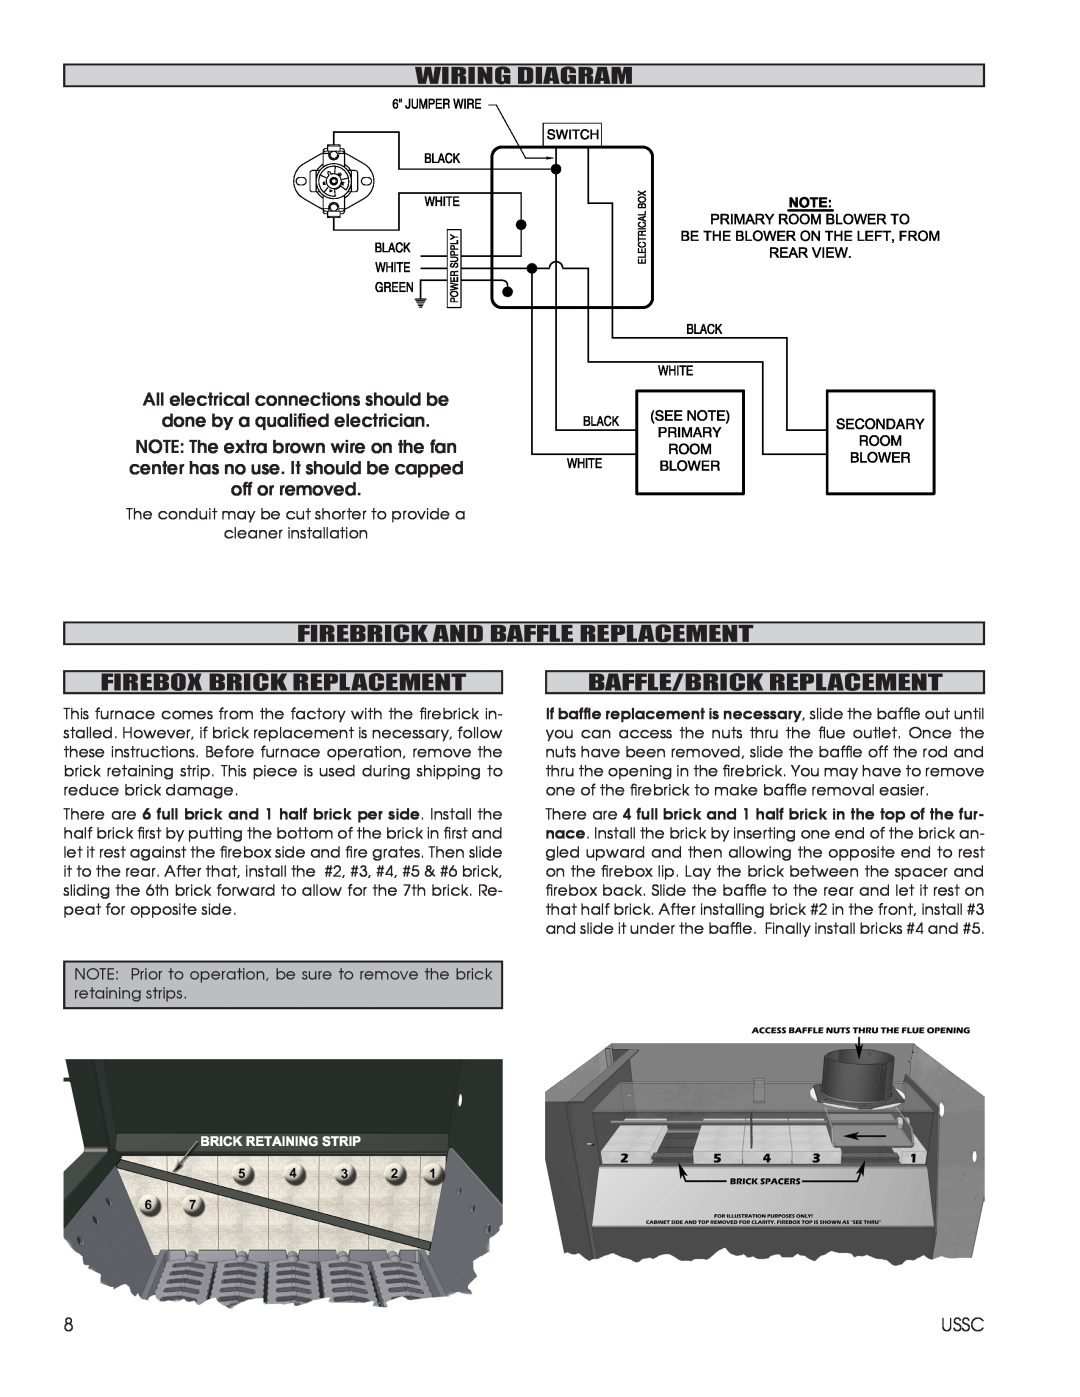 United States Stove 1602M Wiring Diagram, Firebrick And Baffle Replacement, Firebox Brick Replacement 